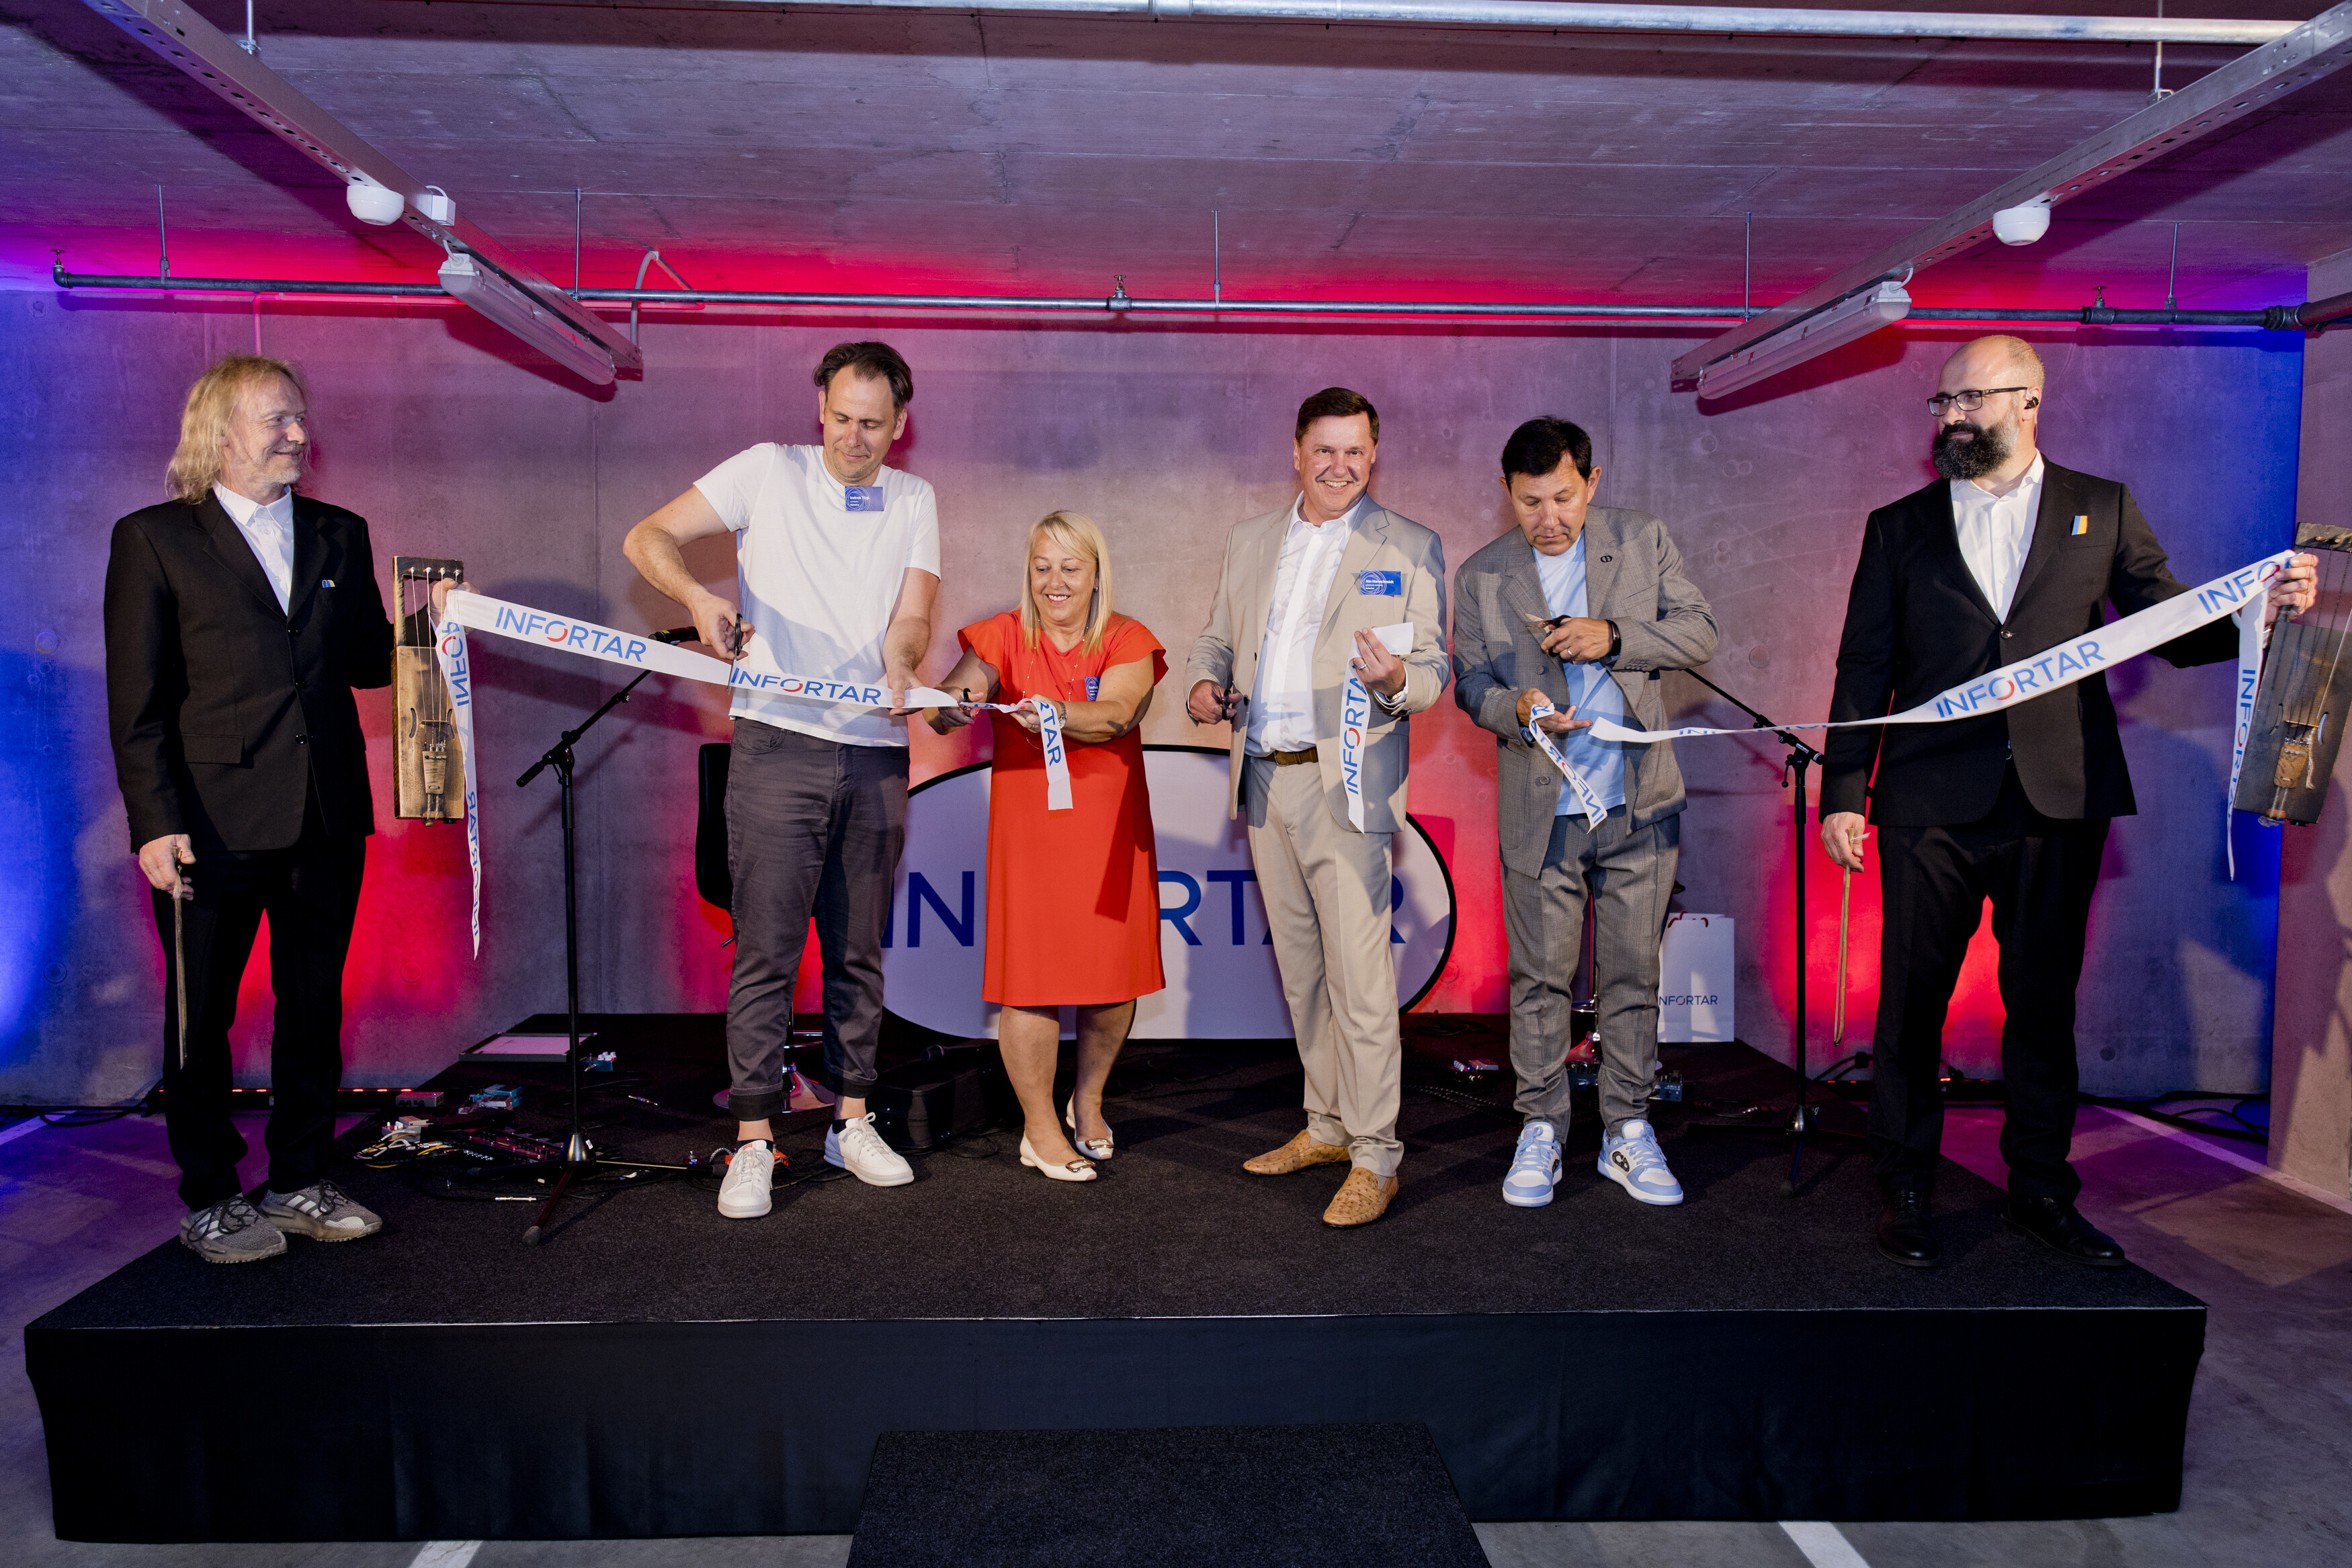 The opening ribbon, held by Puuluup members Ramo Teder and Marko Veisson, is being cut by architect Indrek Tiigi, Infortar management board members Eve Pant and Ain Hanschmidt, and chairman of the supervisory board Enn Pant.